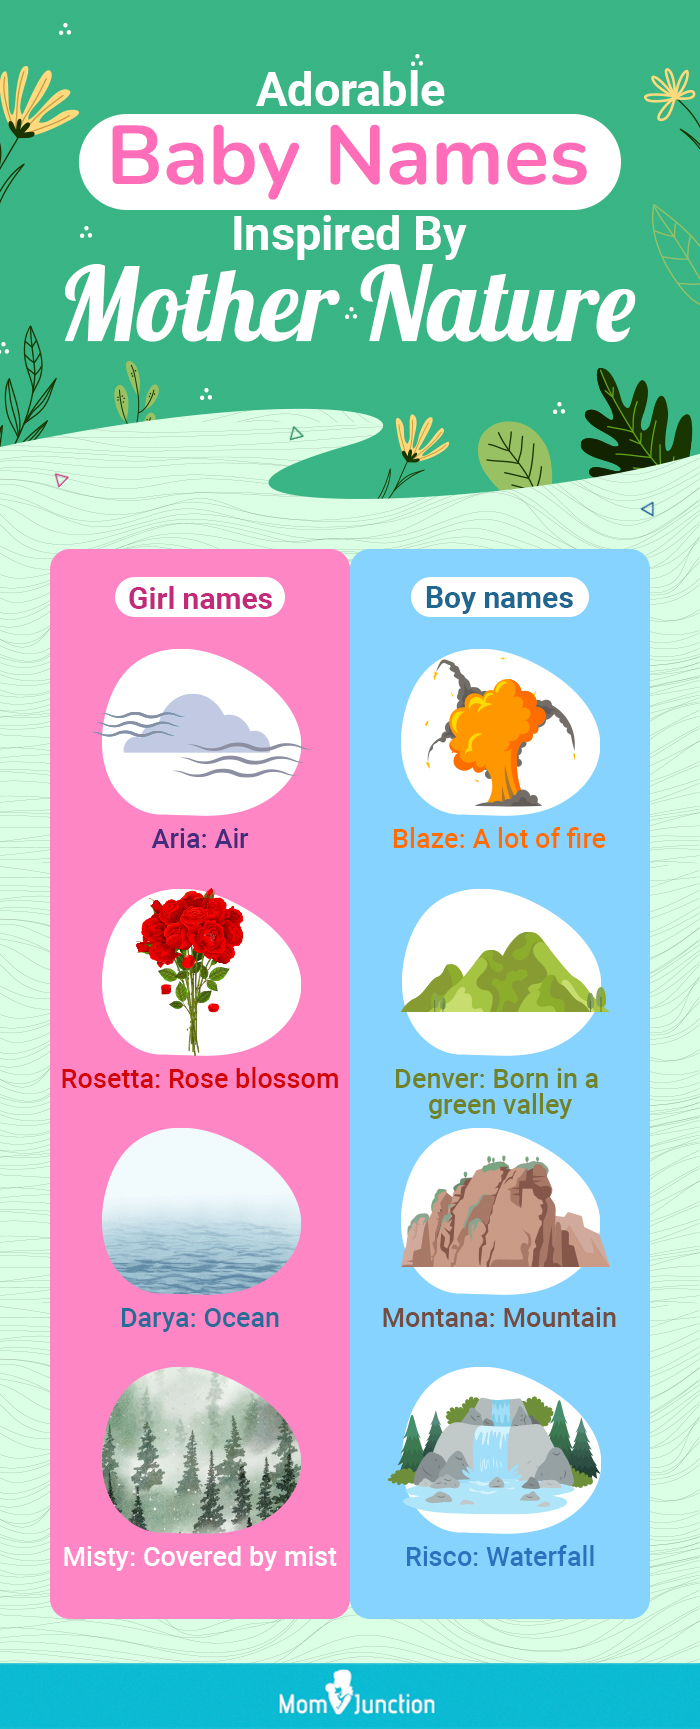 adorable baby names inspired by mother nature (infographic)